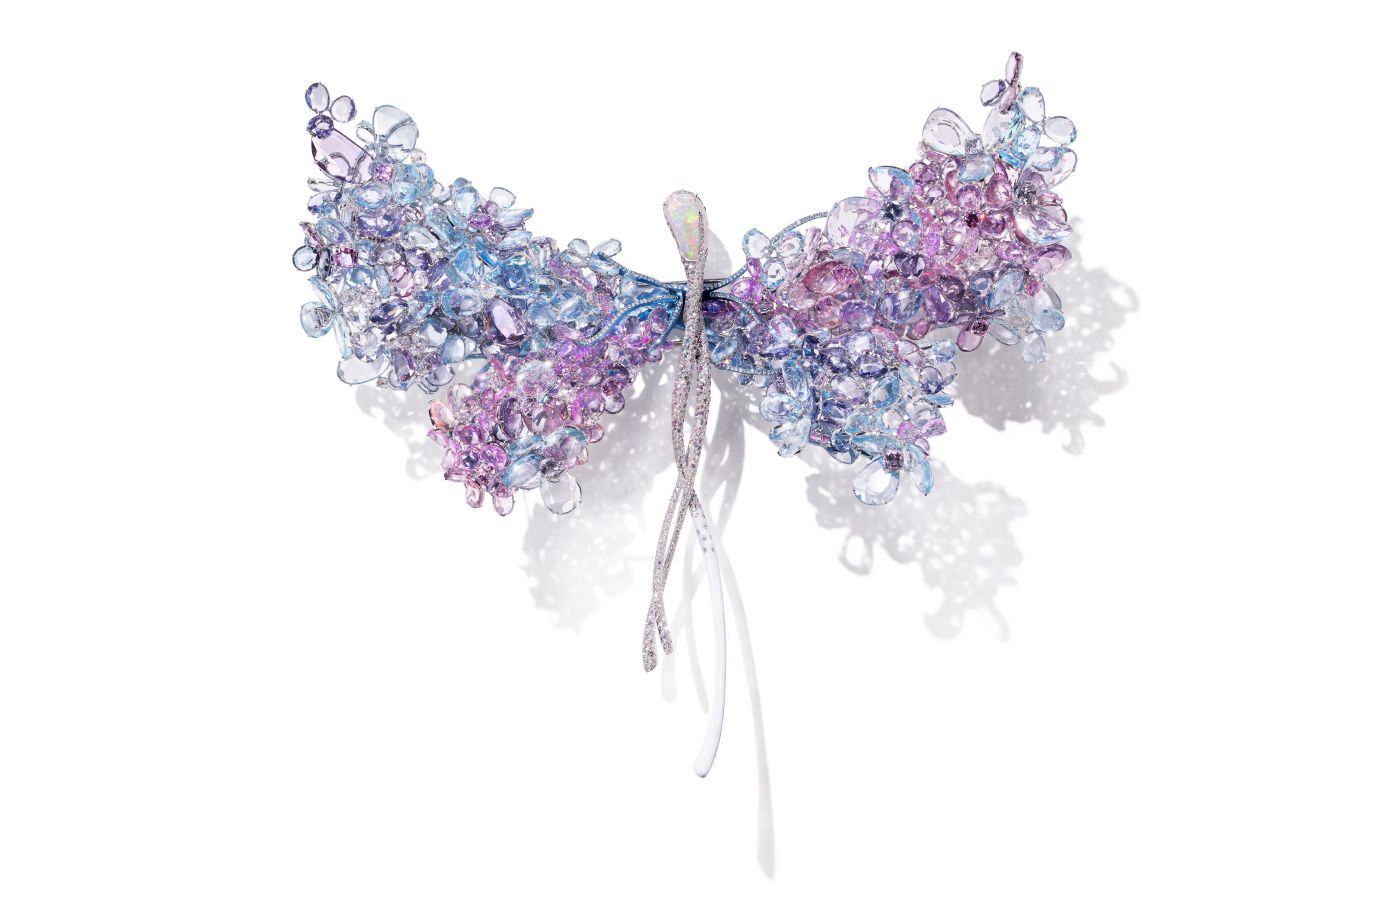 A closer look at the Feng J ‘Blooming Dragonfly Diva’ brooch with ‘Floating Set’ double rose-cut gemstones and the innovative ‘Standing Mounting’ technique to create a painterly style